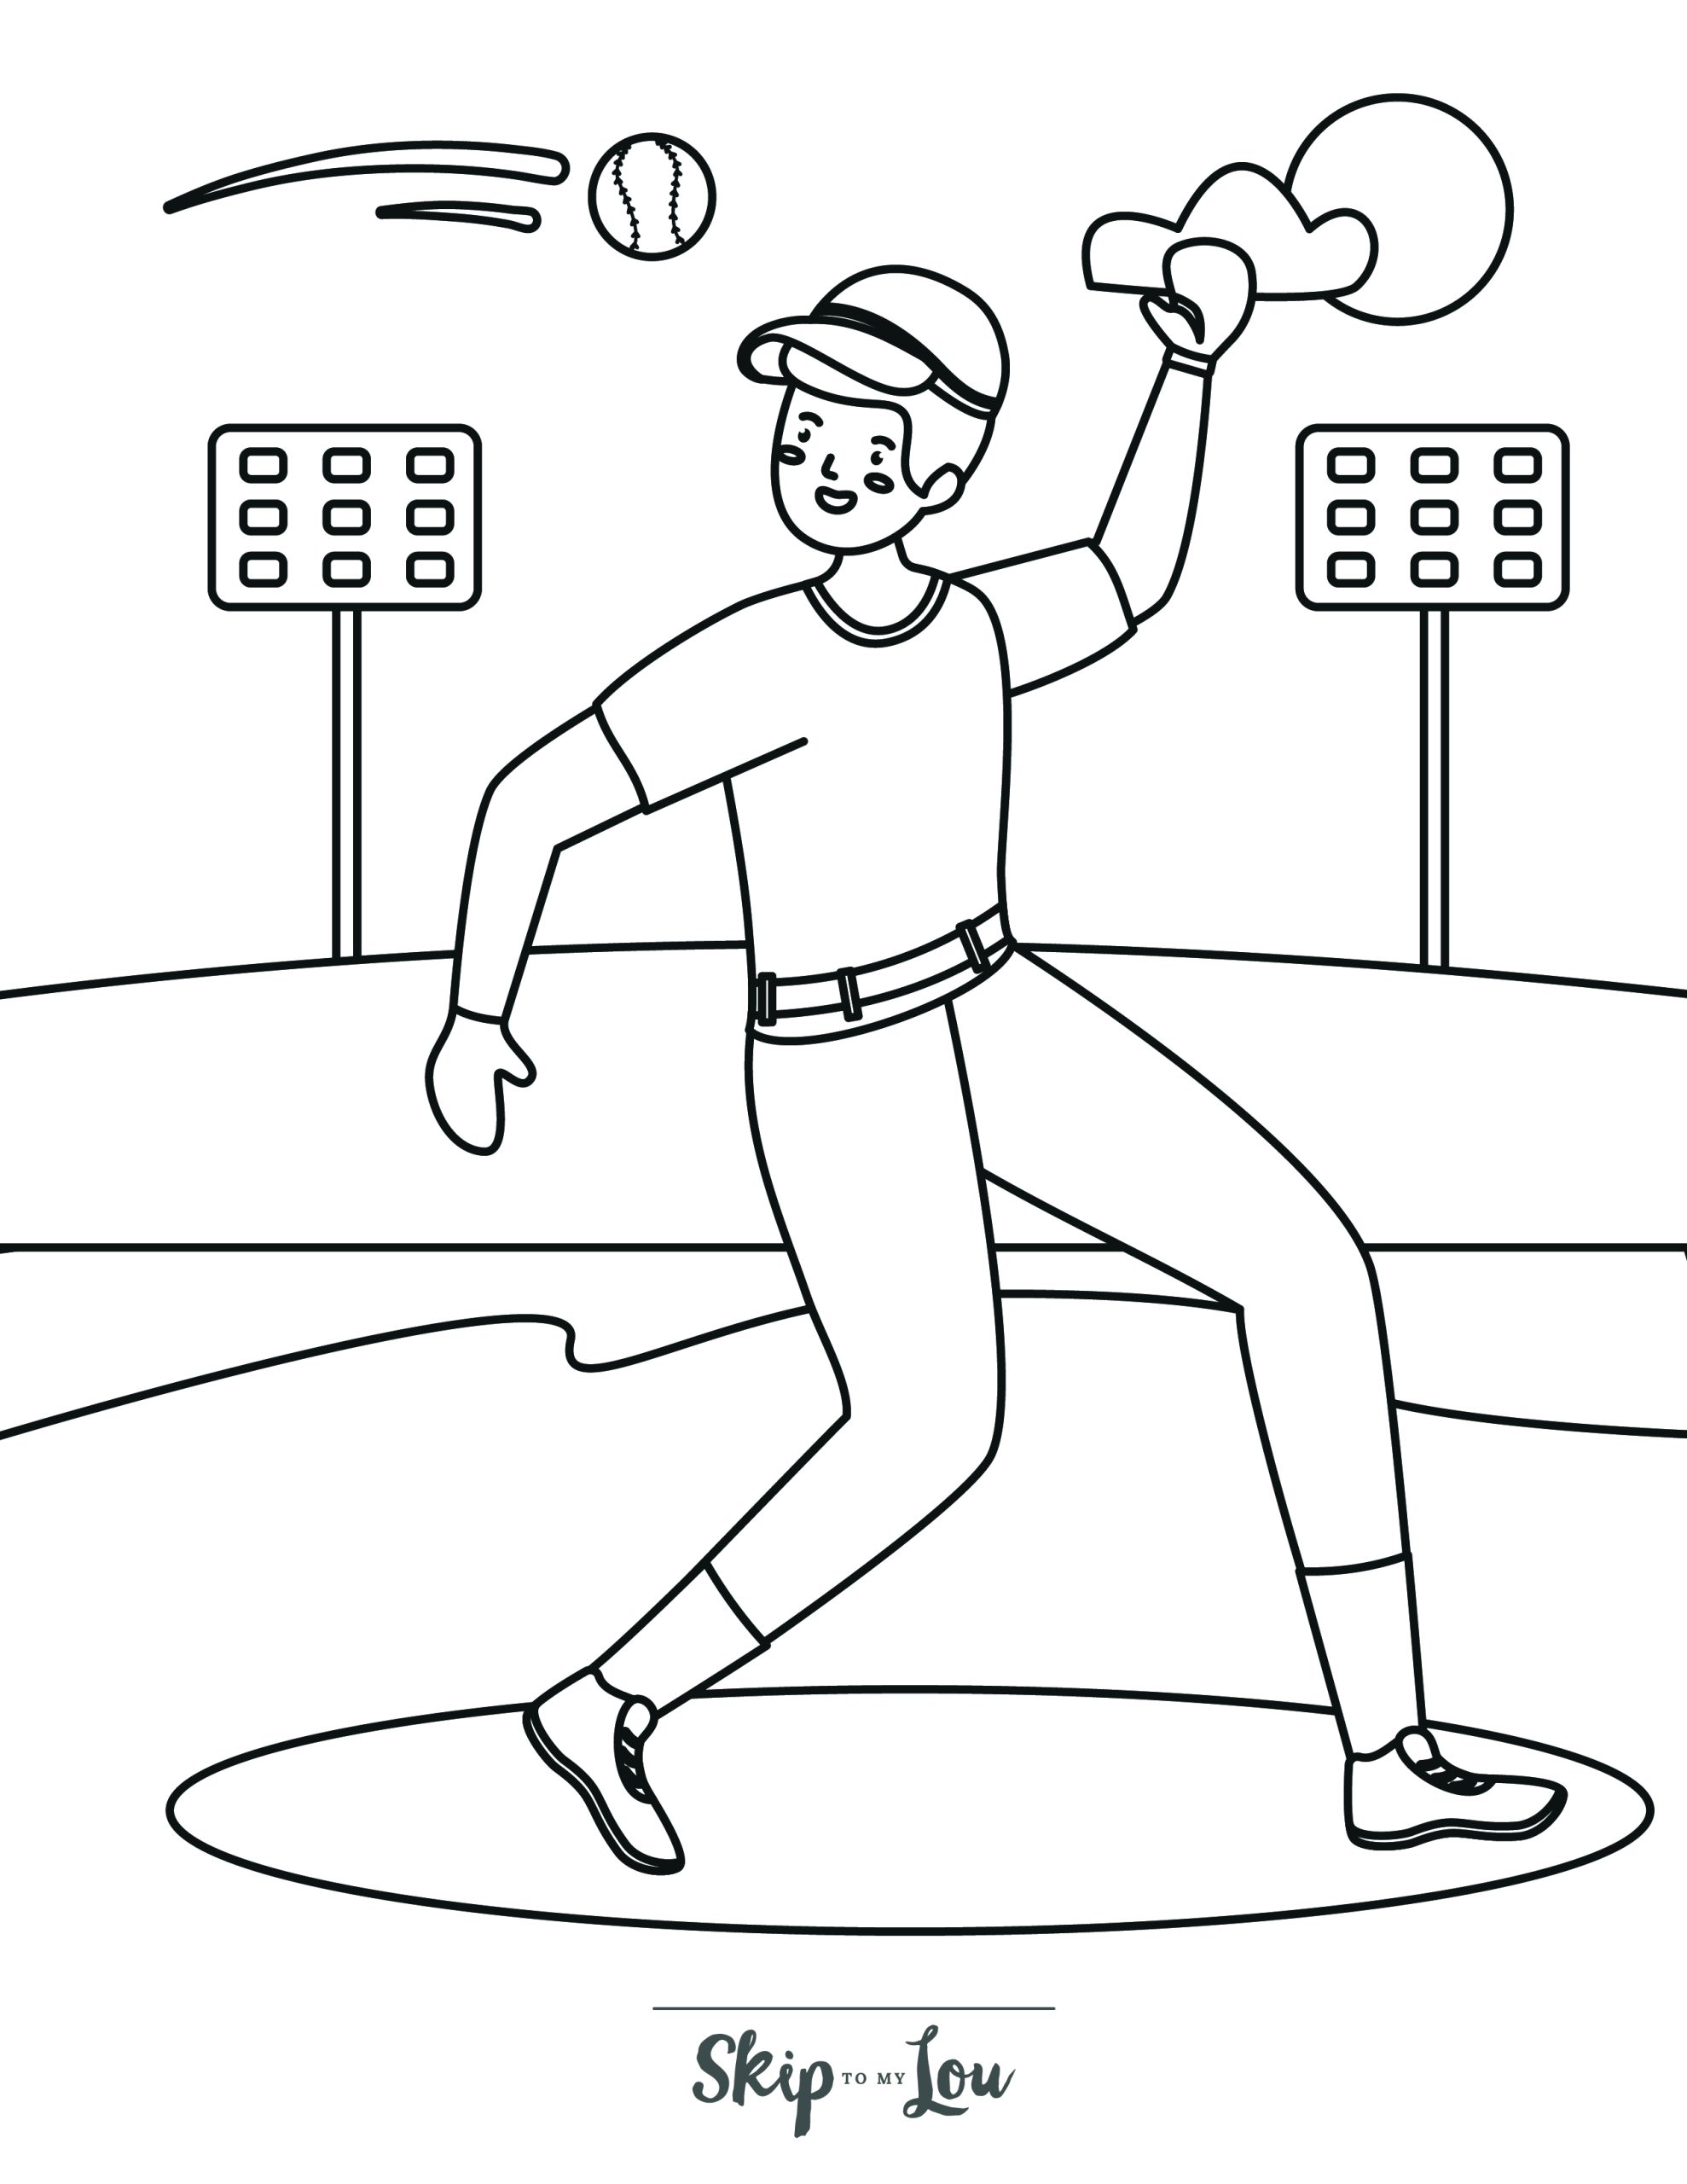 Baseball Coloring Page 10 - A line drawing of a baseball player about to catch a baseball.